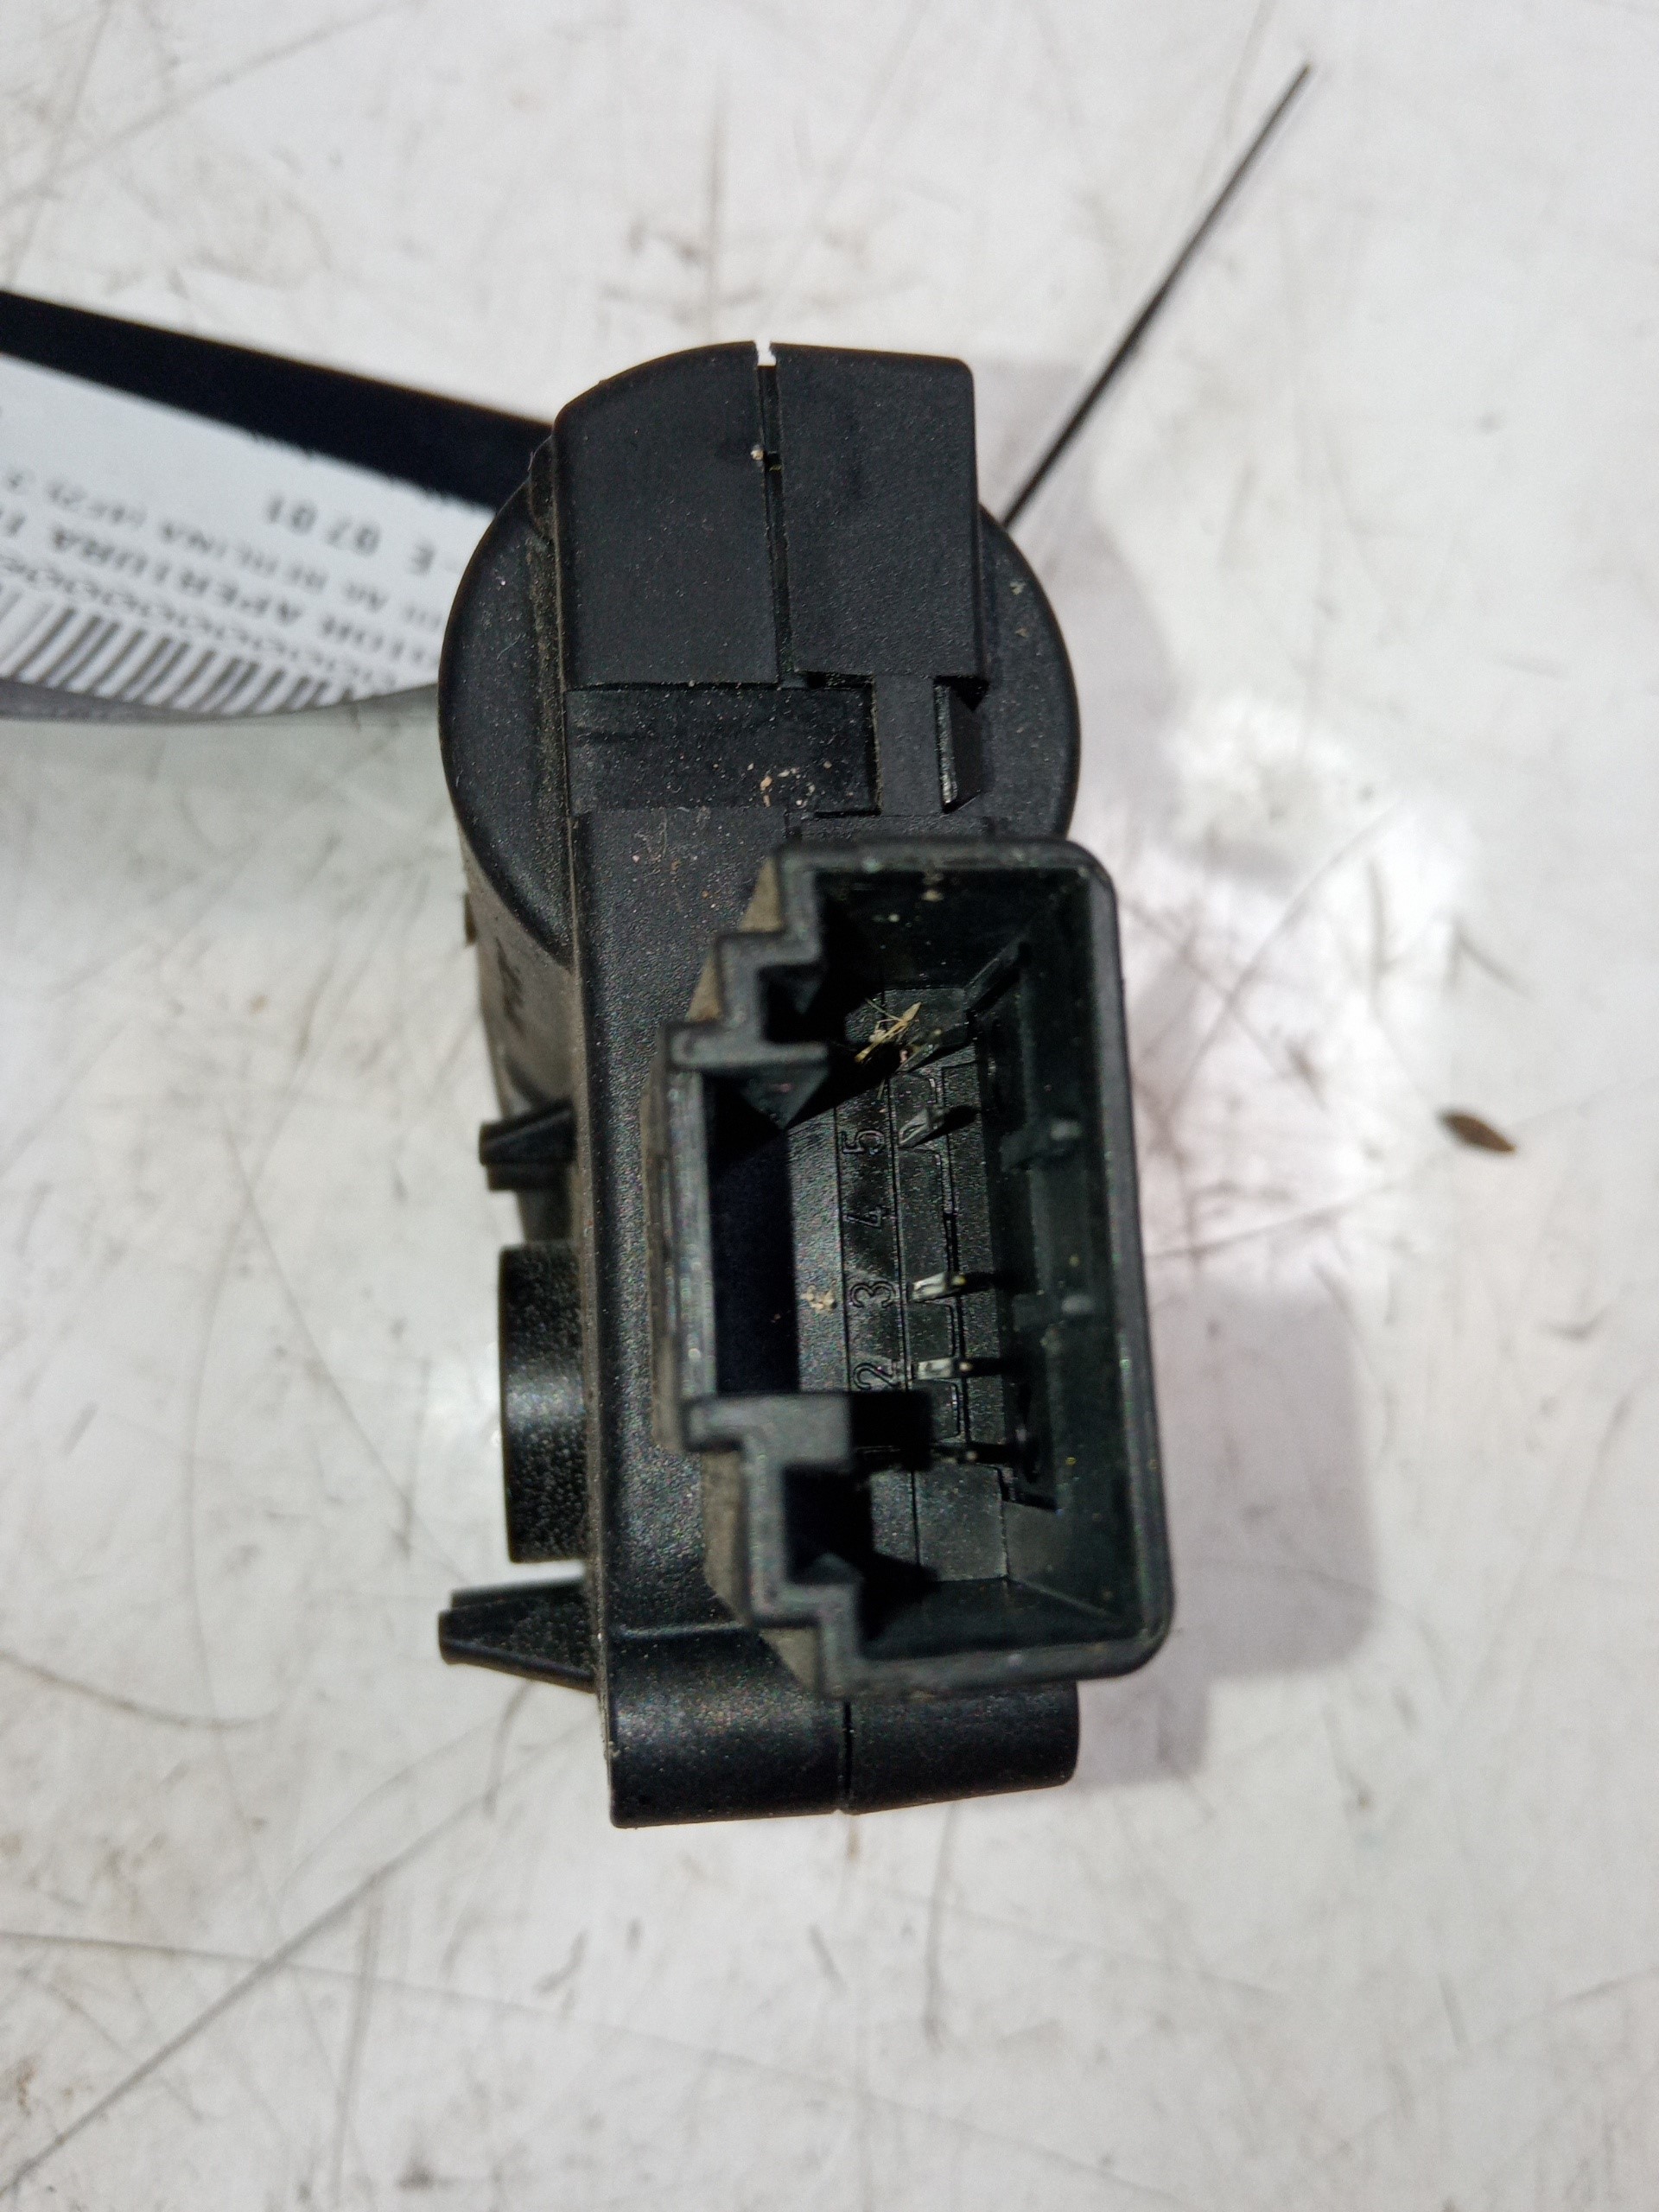 AUDI A6 C6/4F (2004-2011) Air Conditioner Air Flow Valve Motor 4F0820511A, 5PINES 24959036